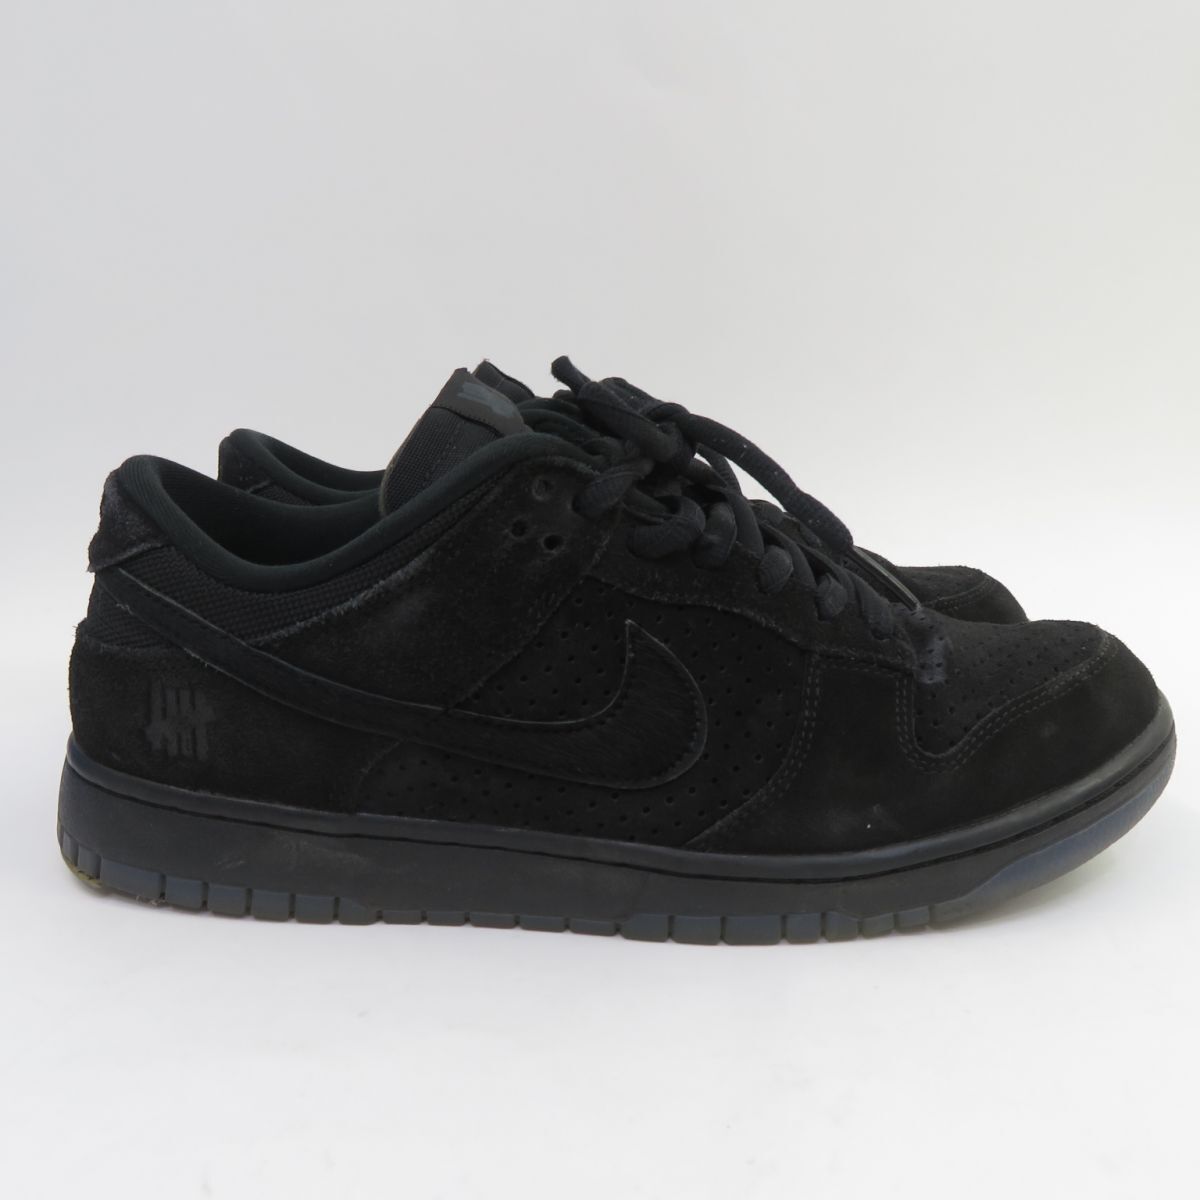 153s NIKE × UNDEFEATED ナイキ アンディフィーテッド DUNK LOW SP ダンク ロー DO9329-001 US11 29cm 箱有 ※中古_画像4